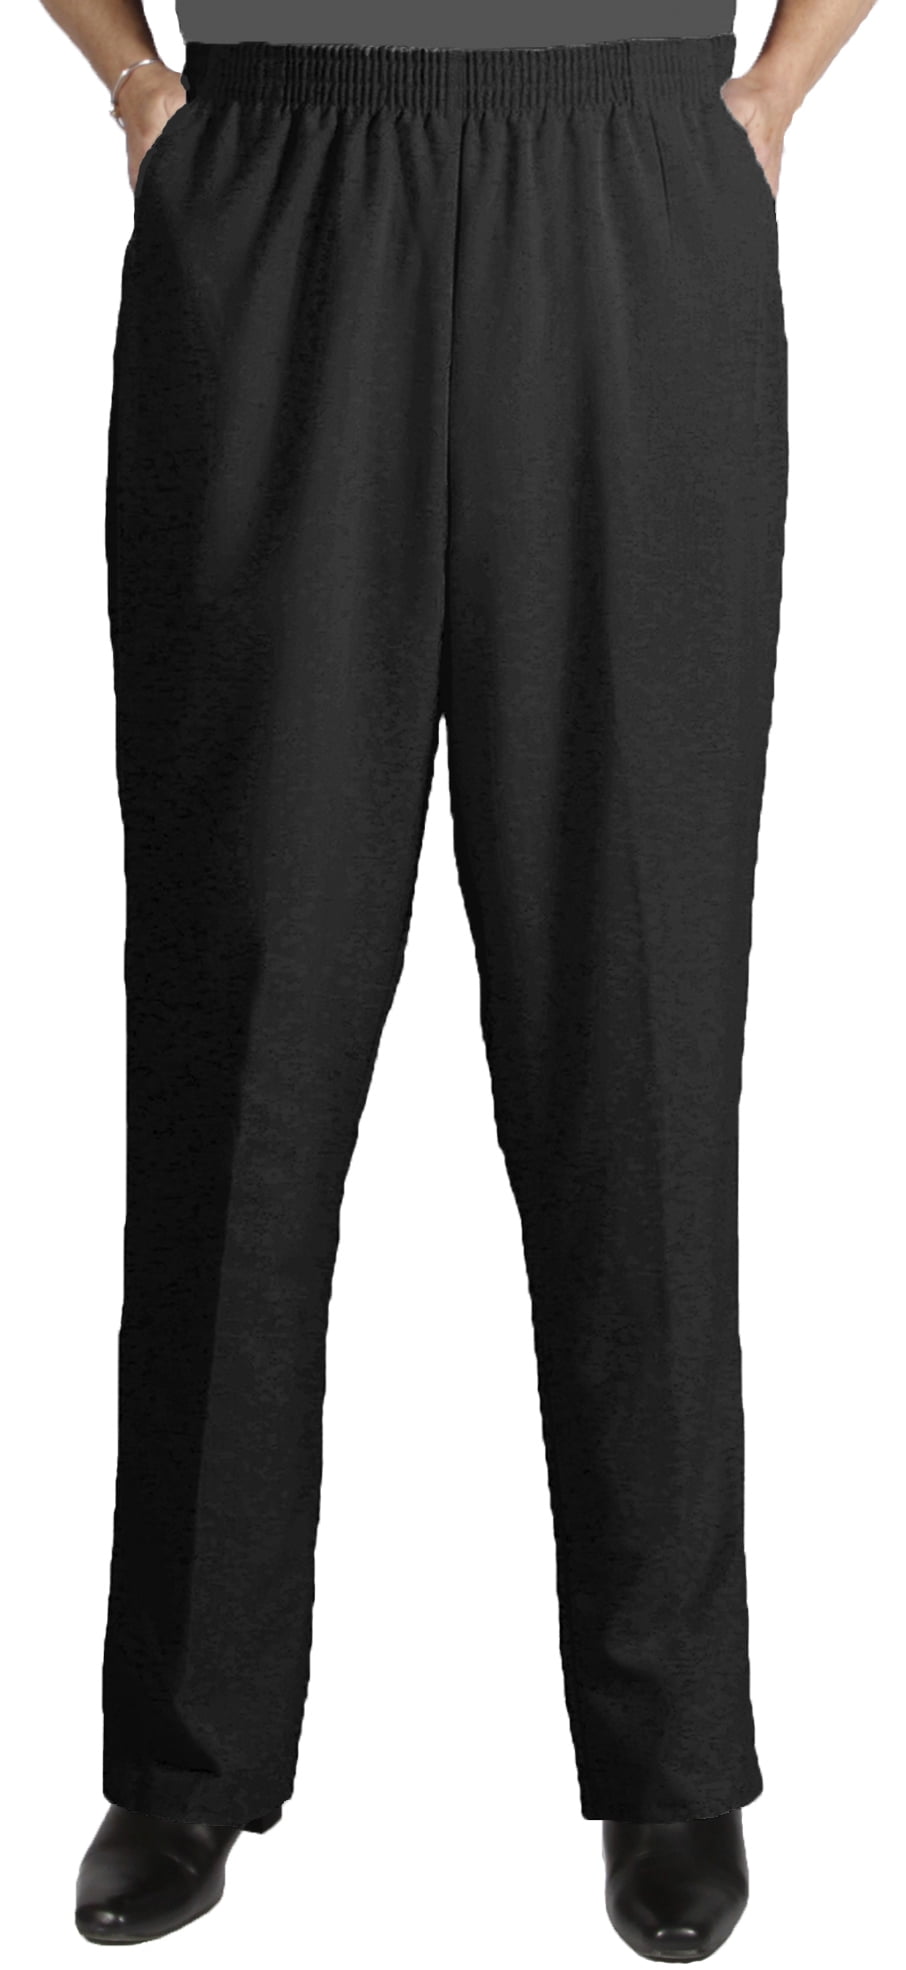 Viviana Women's Plus Size Elastic Waist Pull-On Shaped Fit Dress Pants with Pockets 